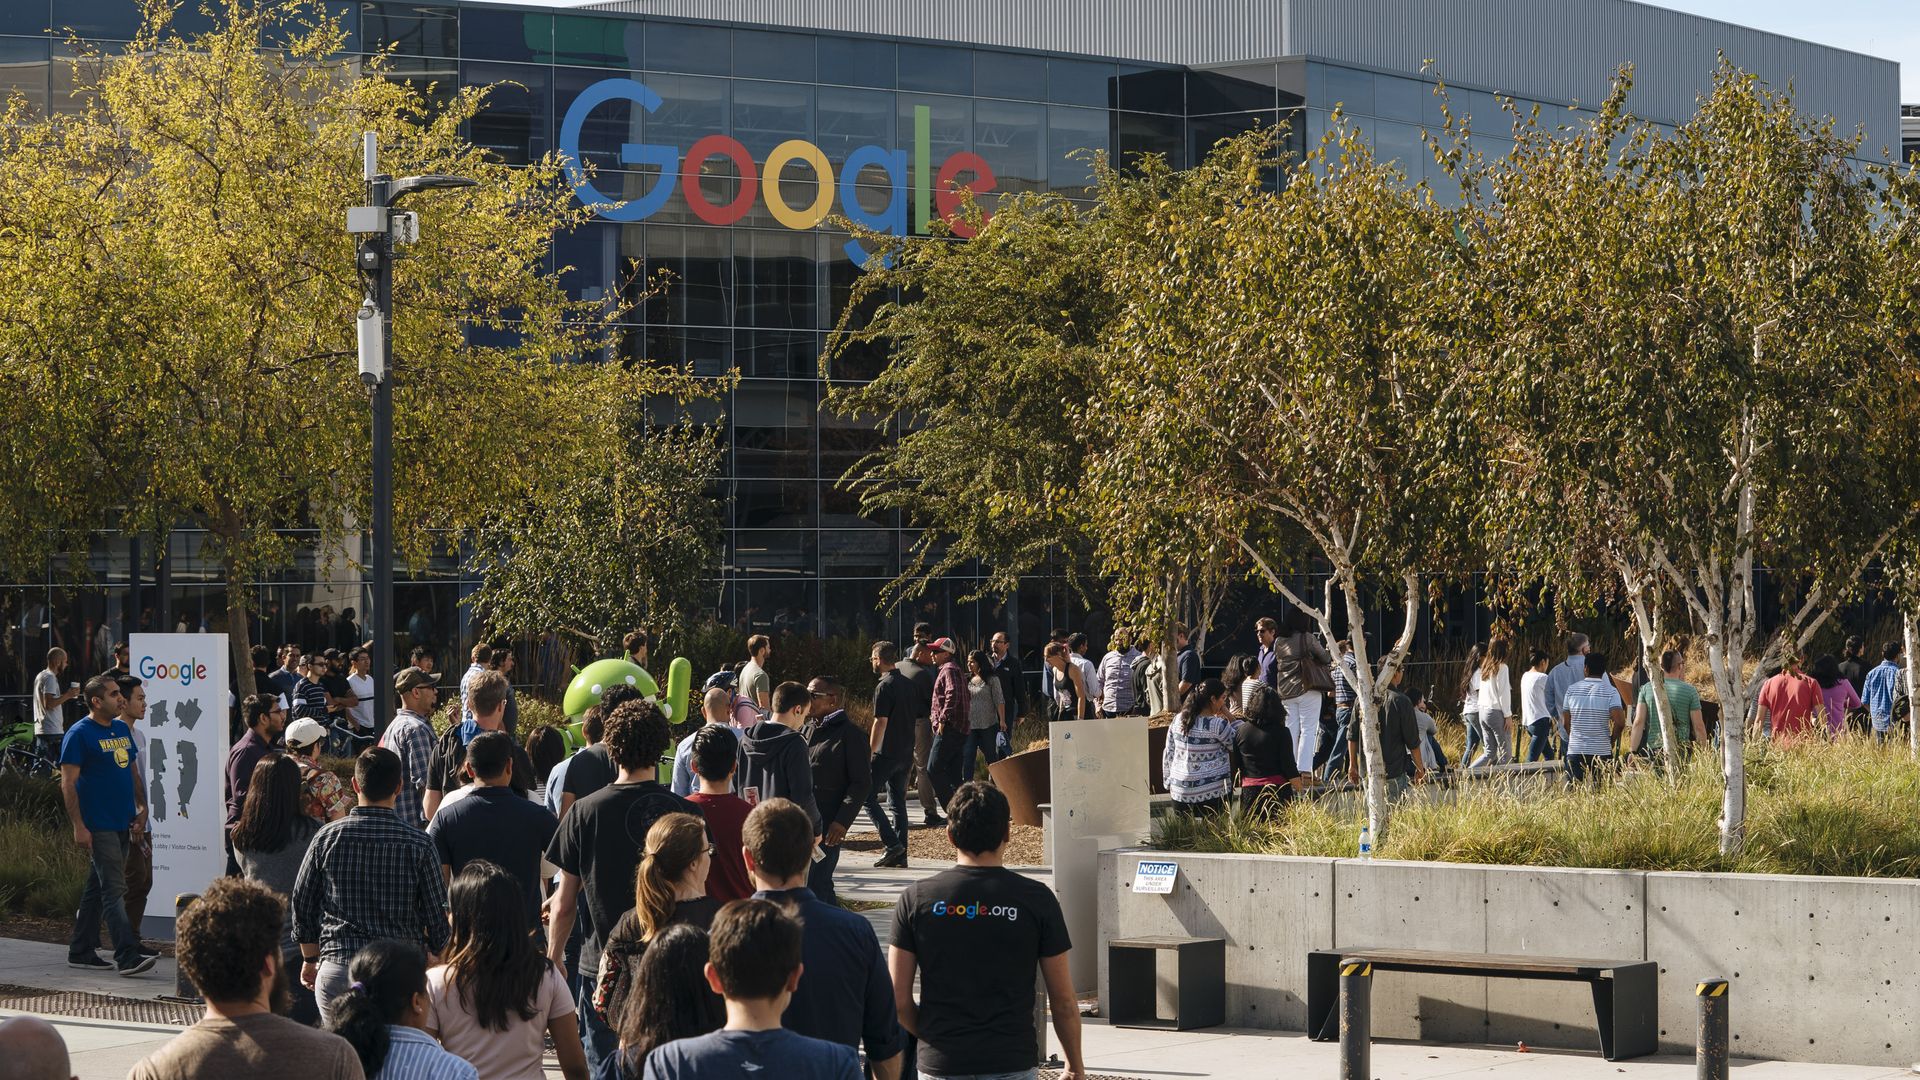 In this image, a large crowd of people walk towards a Google office during a walkout protest